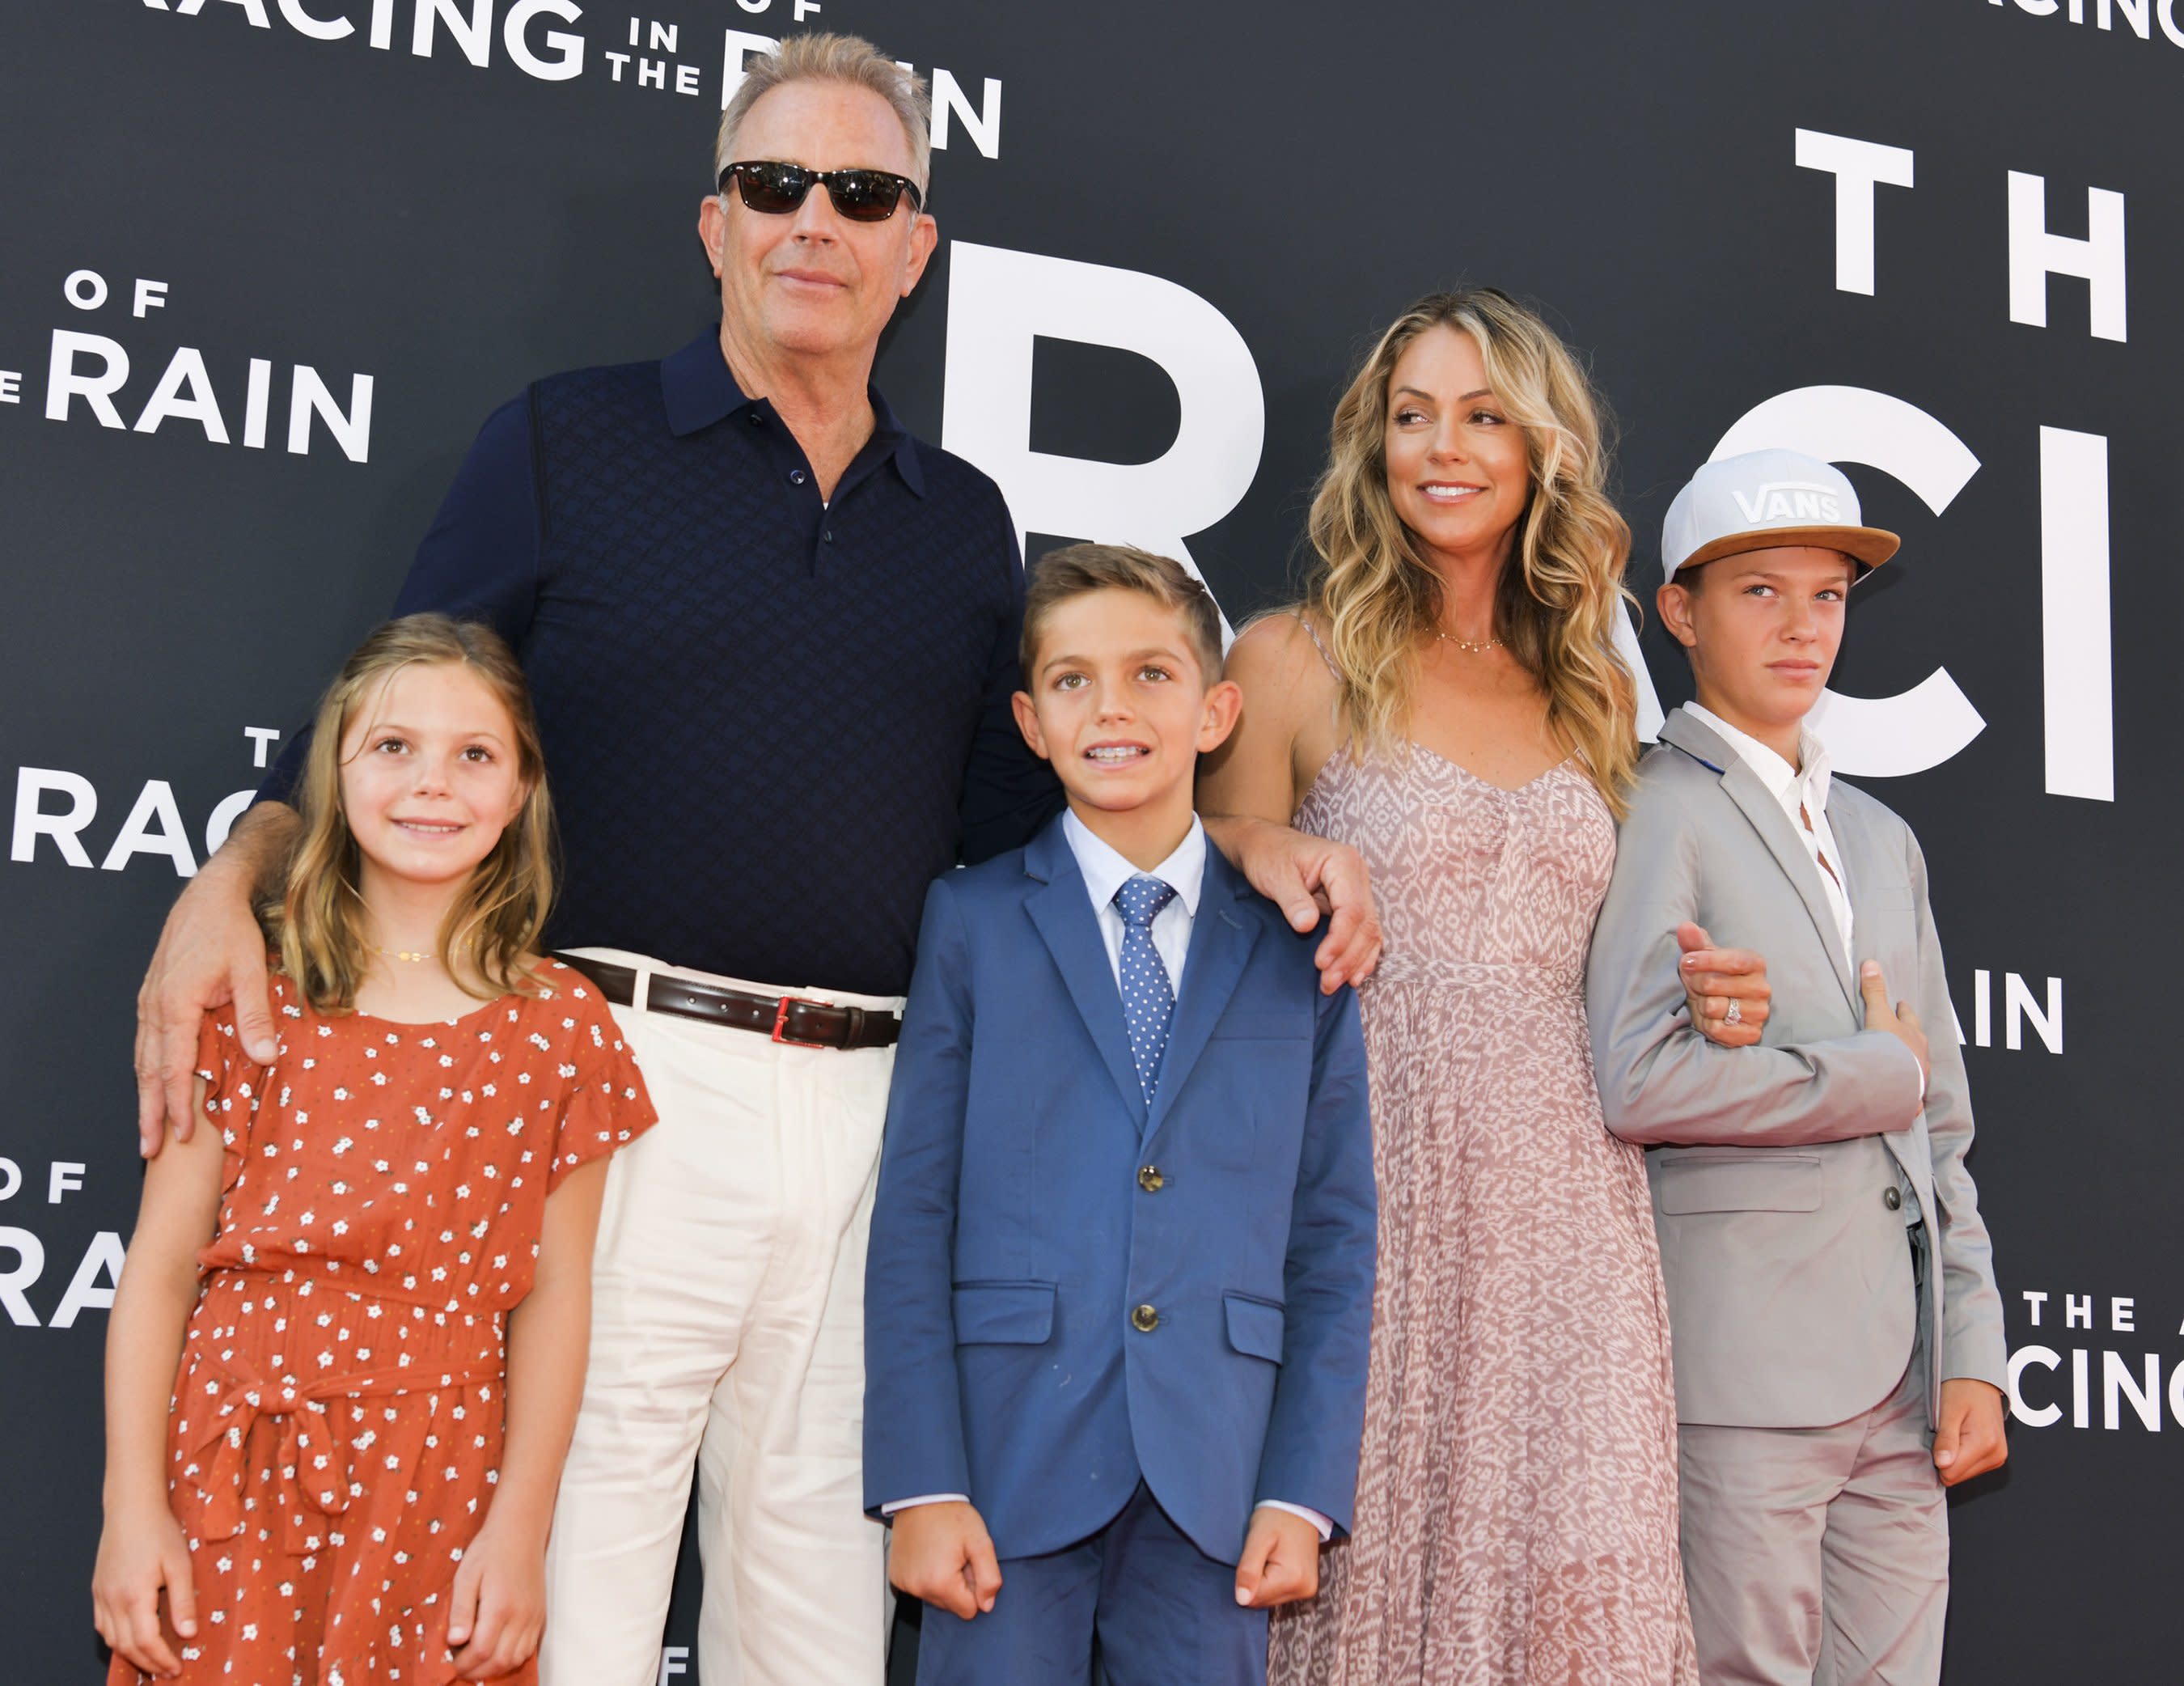 Family Night Out! Kevin Costner, His Wife and Their 3 Kids Enjoy a Los